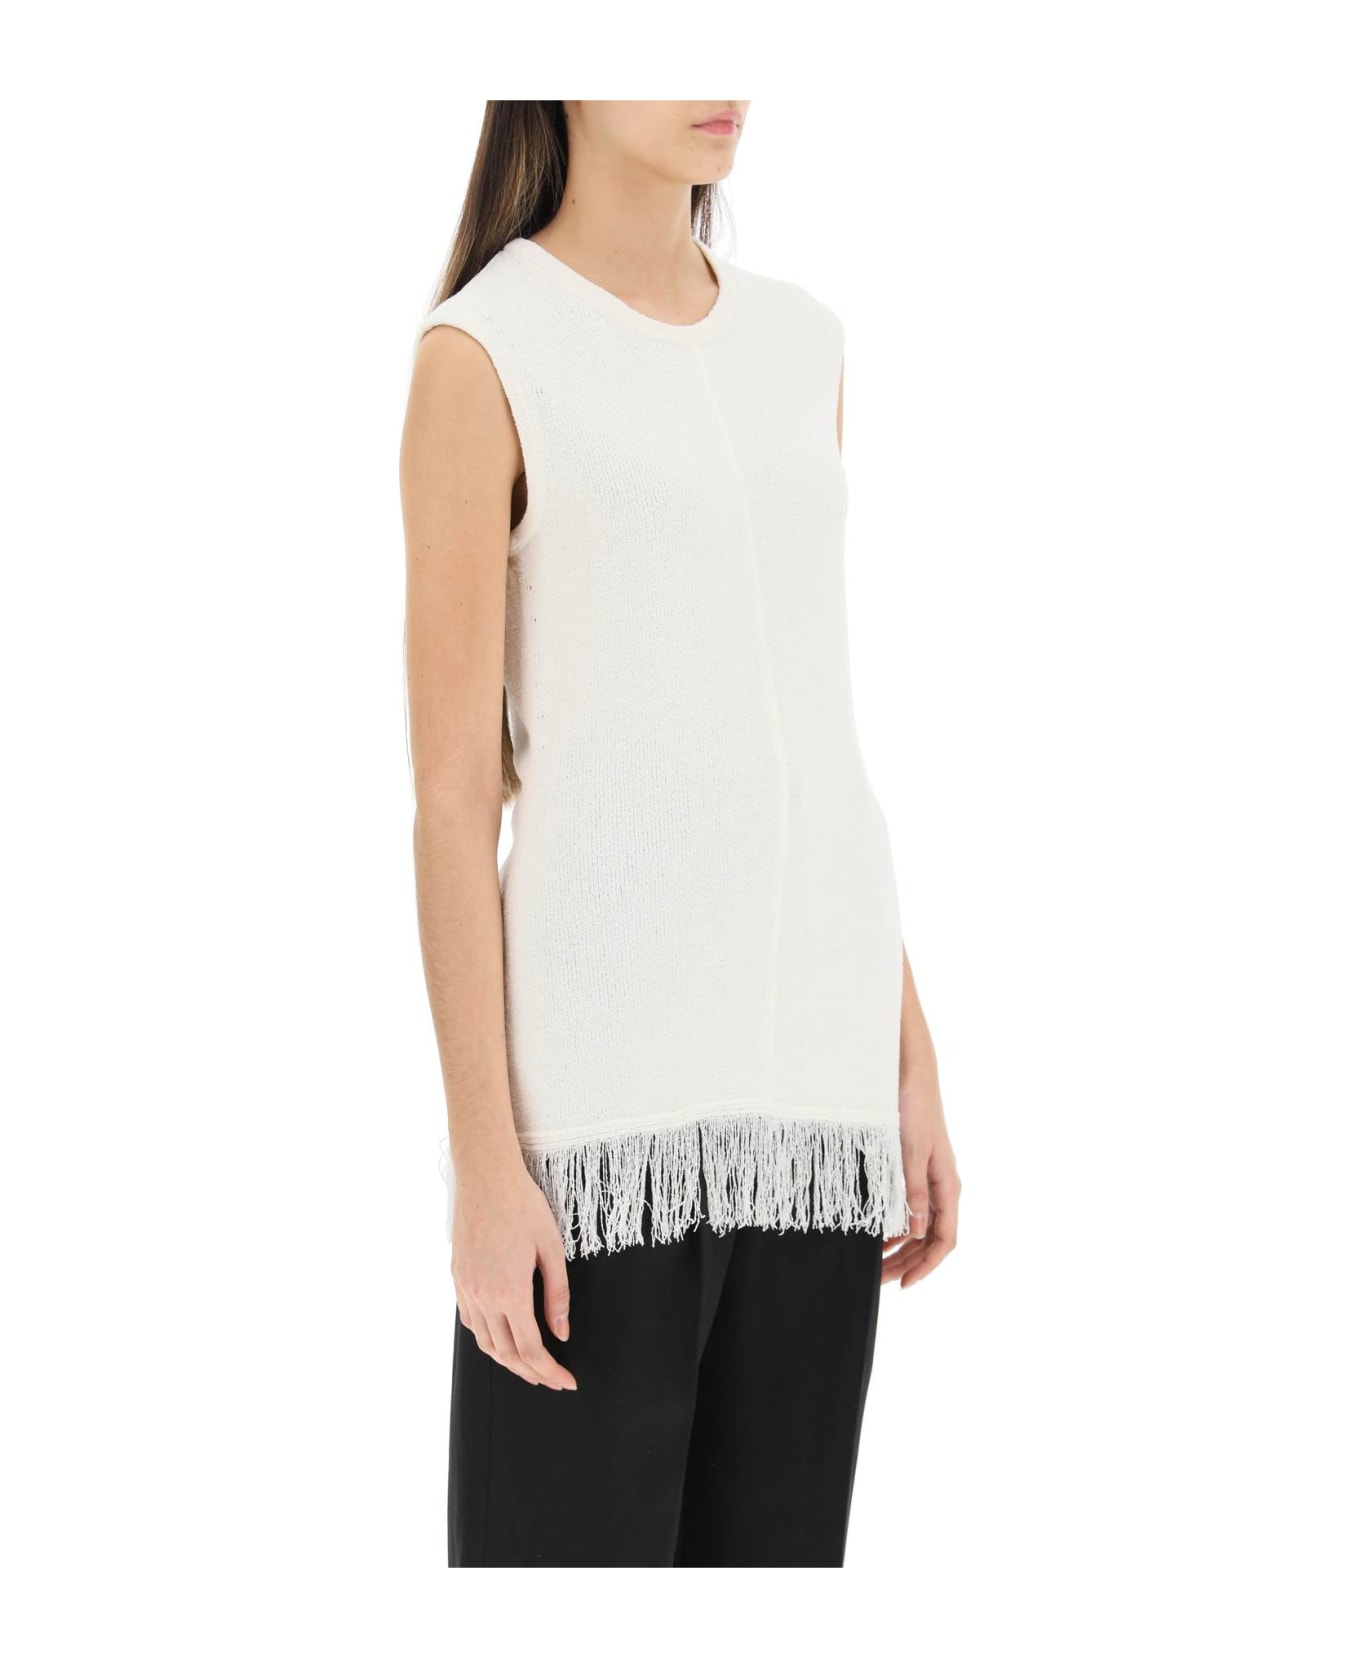 Loulou Studio Fringed Bouclé Knit Top - IVORY (White) タンクトップ